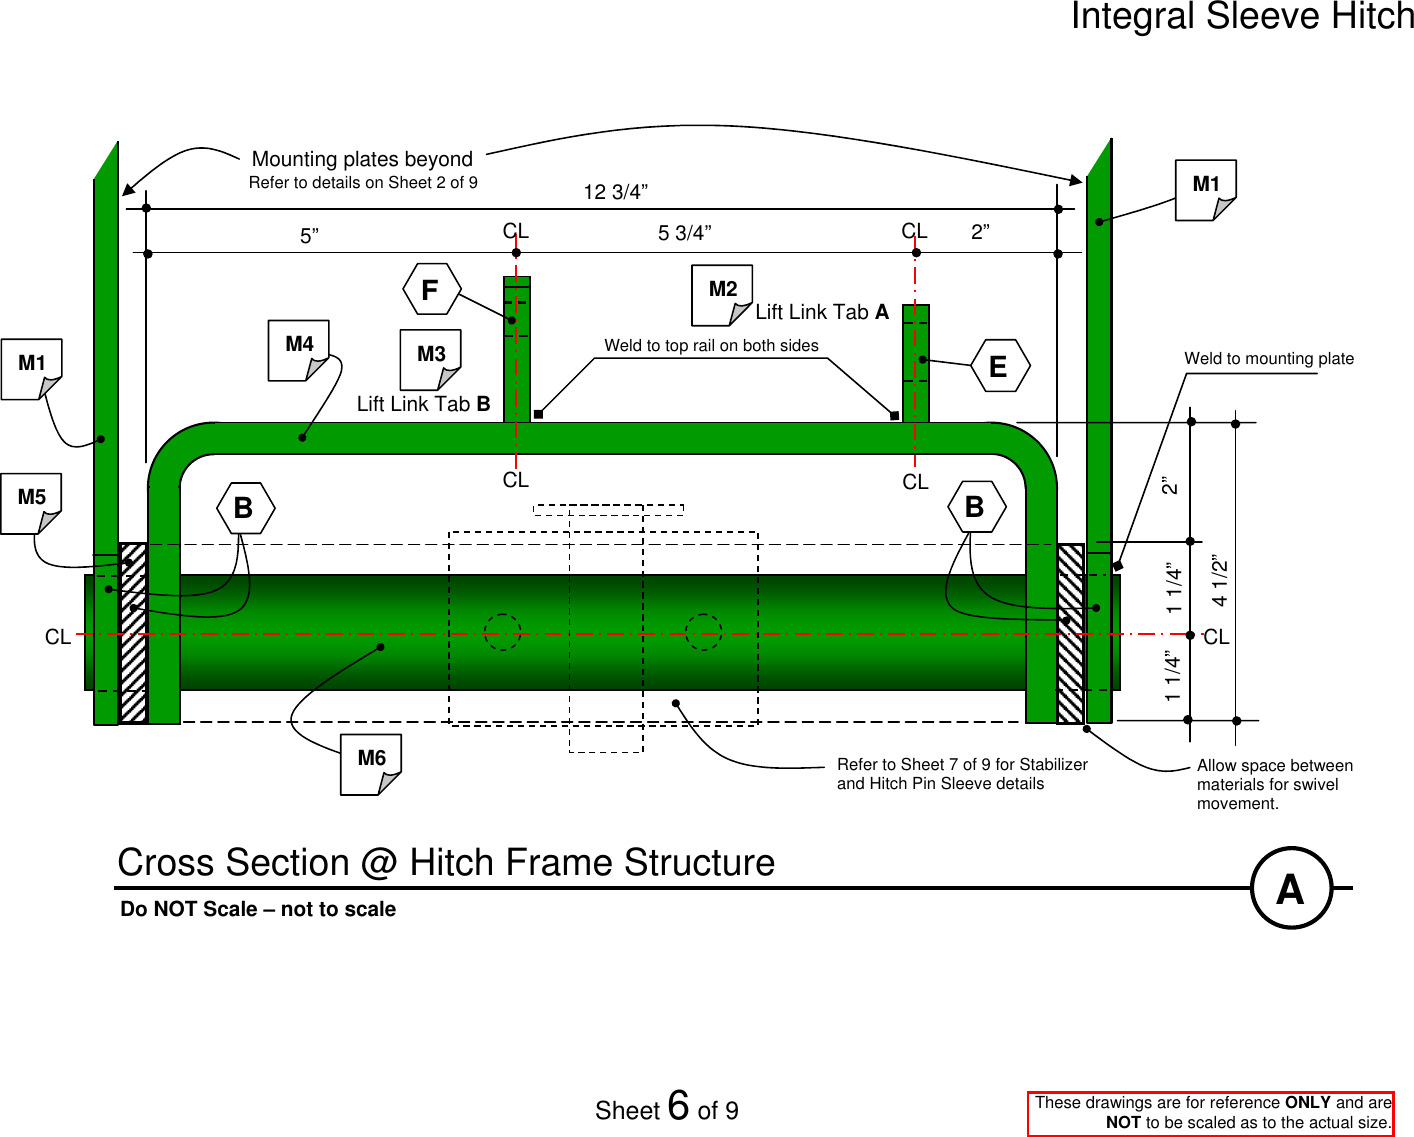 Page 6 of 9 - Integral Sleeve Hitch Dimension Drawings (AM31668) As Of 20081016 Drawings(AM31668)